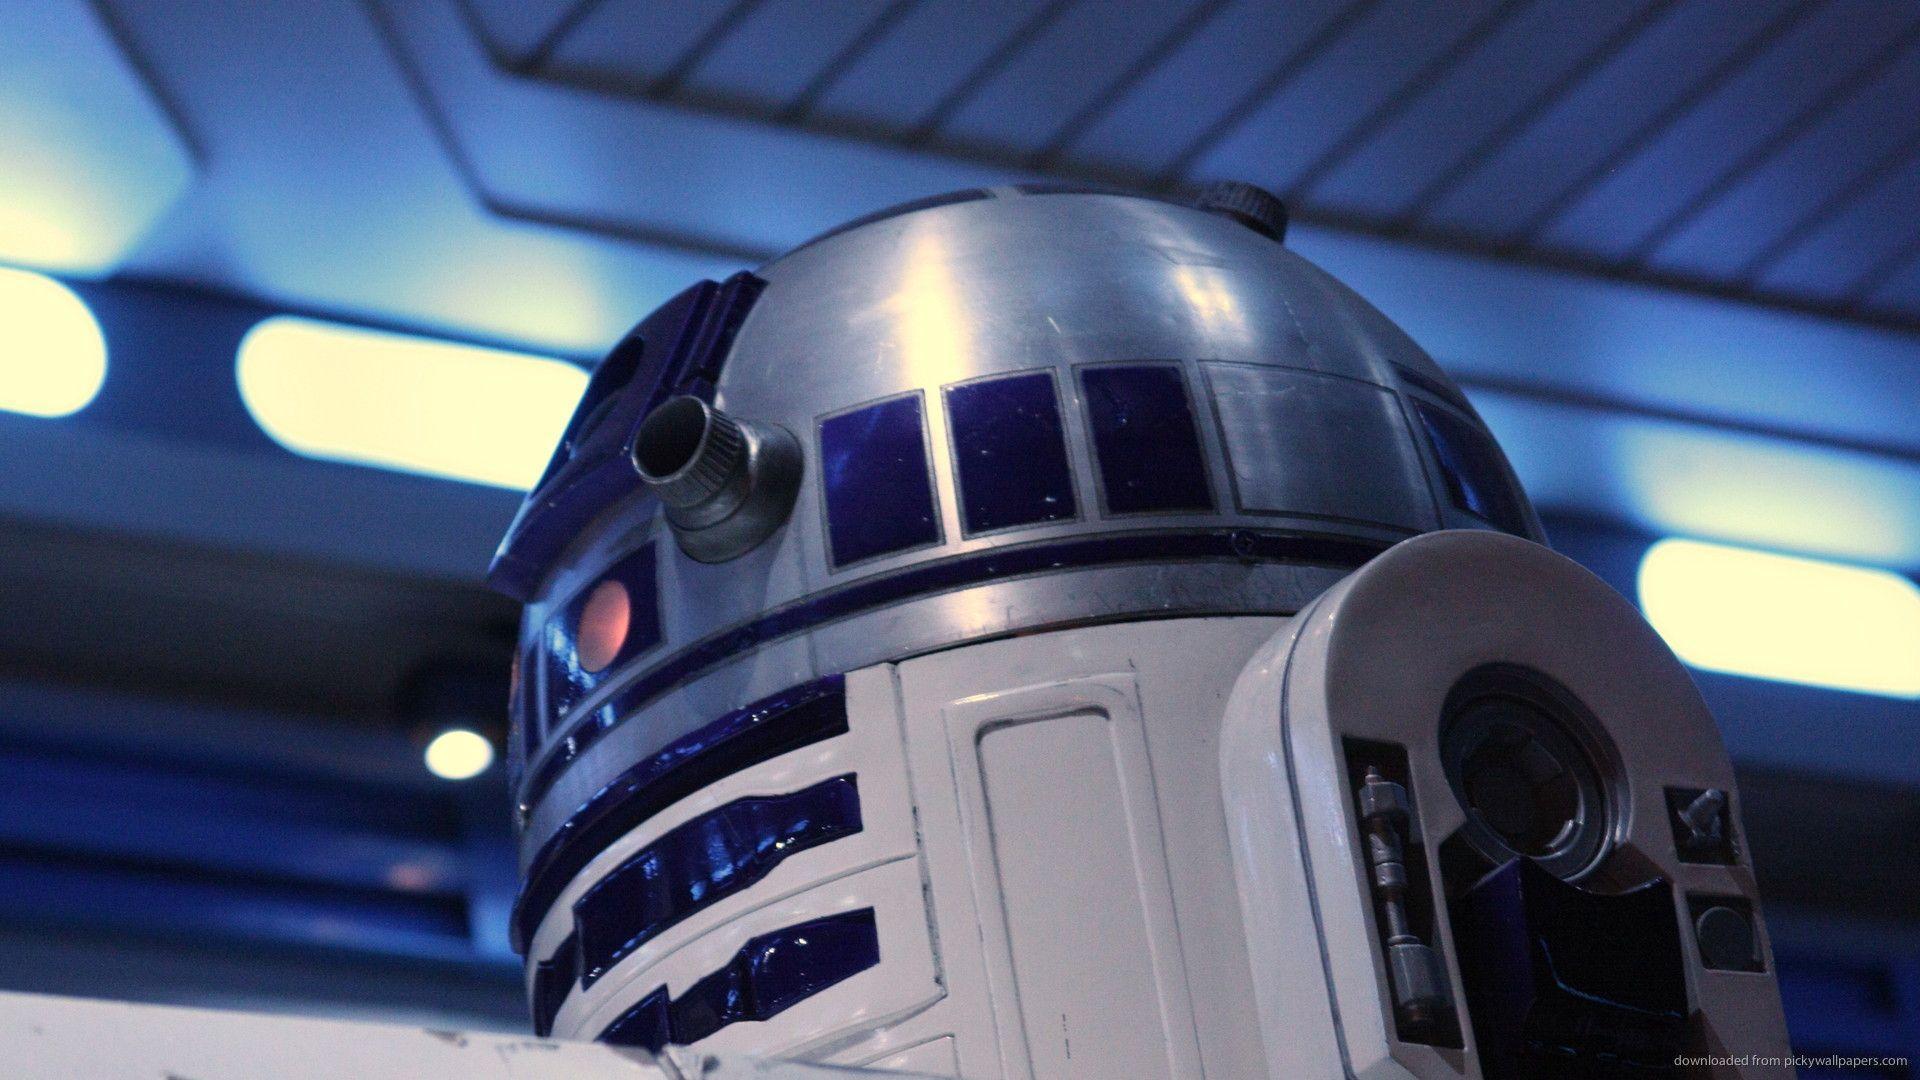 Download 1920x1080 Mounted R2D2 Wallpaper